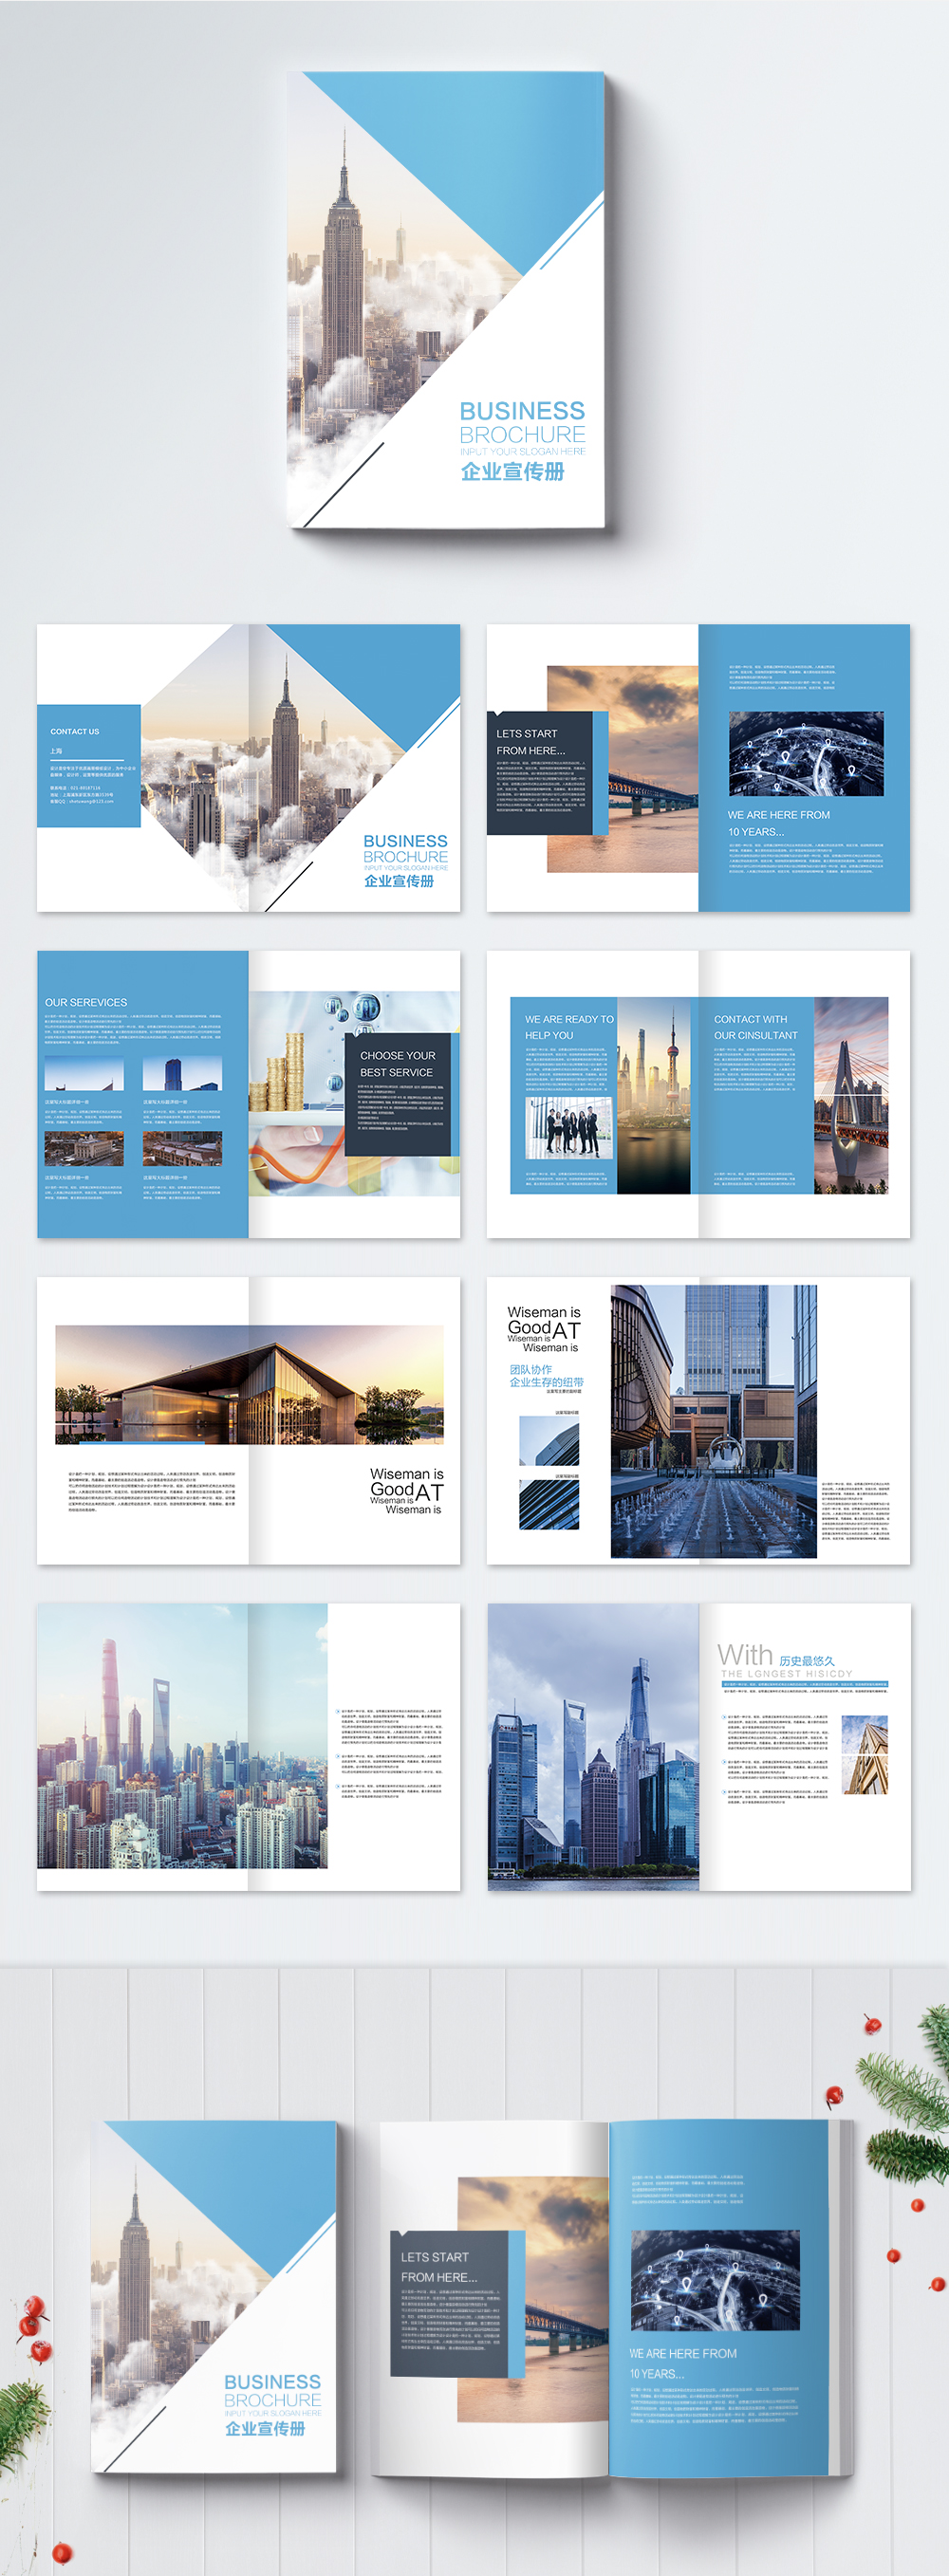 Brochure of high end group of atmosphere template image_picture free ...